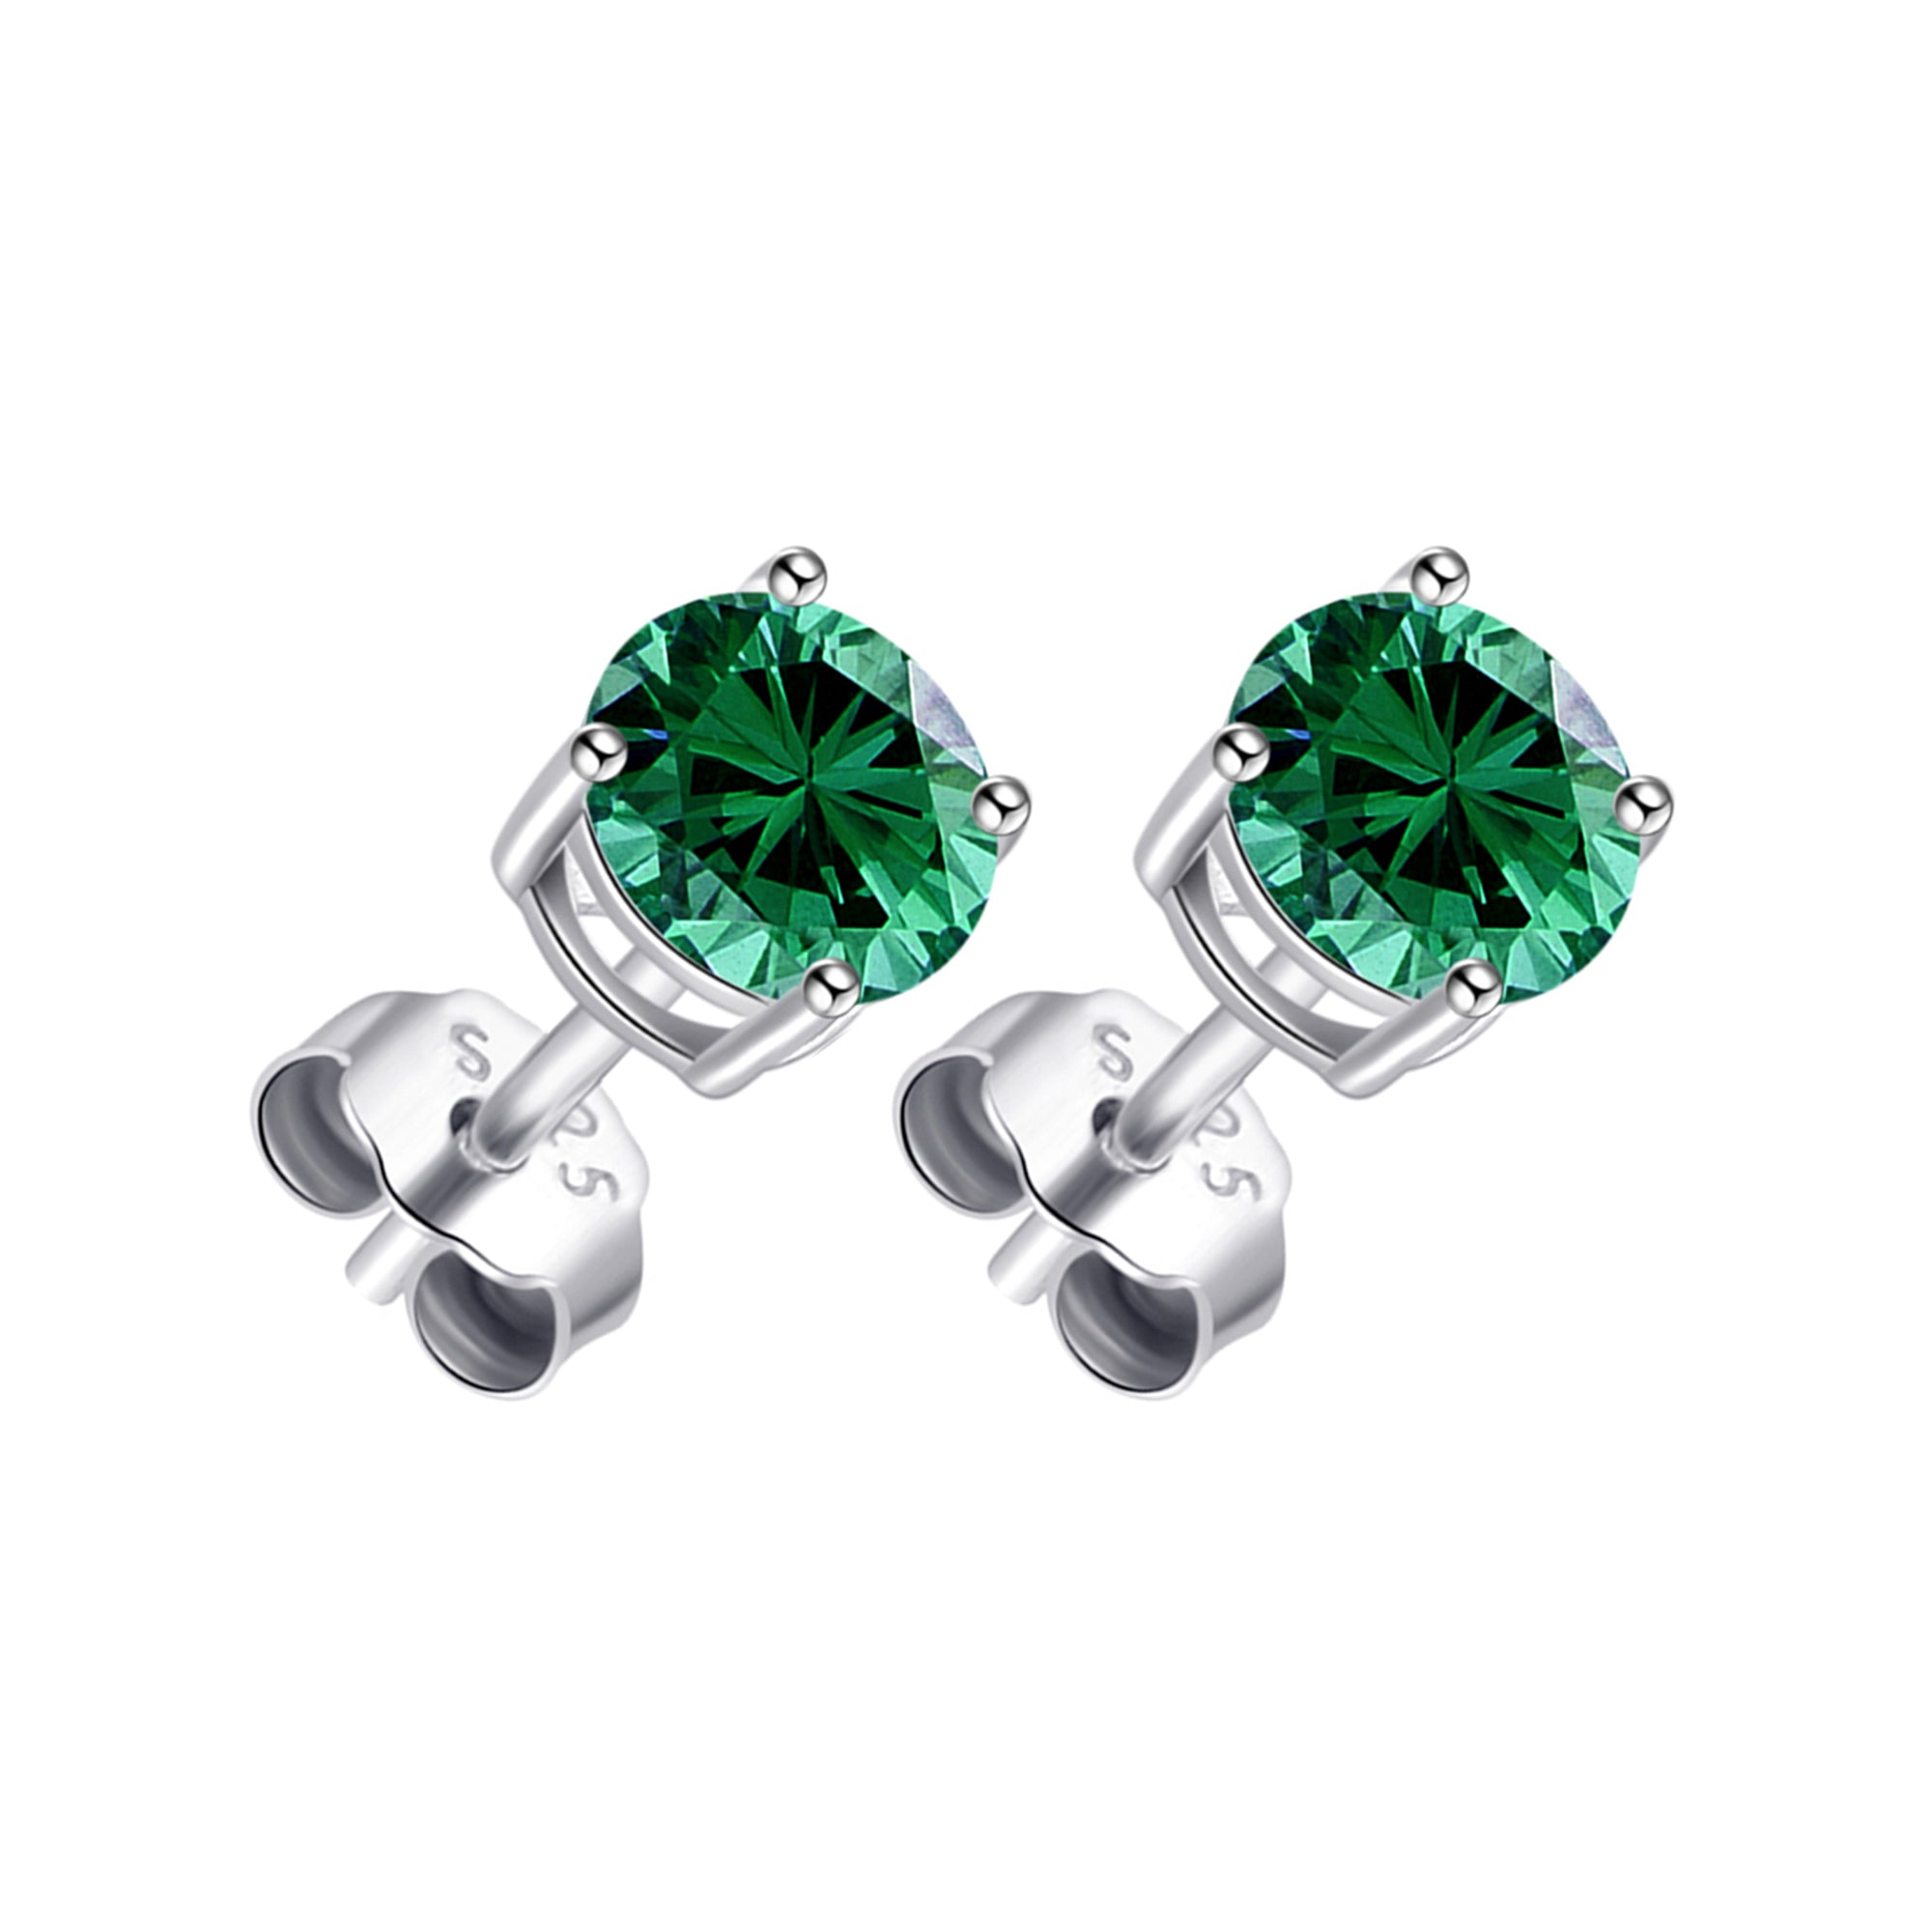 Sterling Silver Green Earrings Created with Zircondia® Crystals by Philip Jones Jewellery